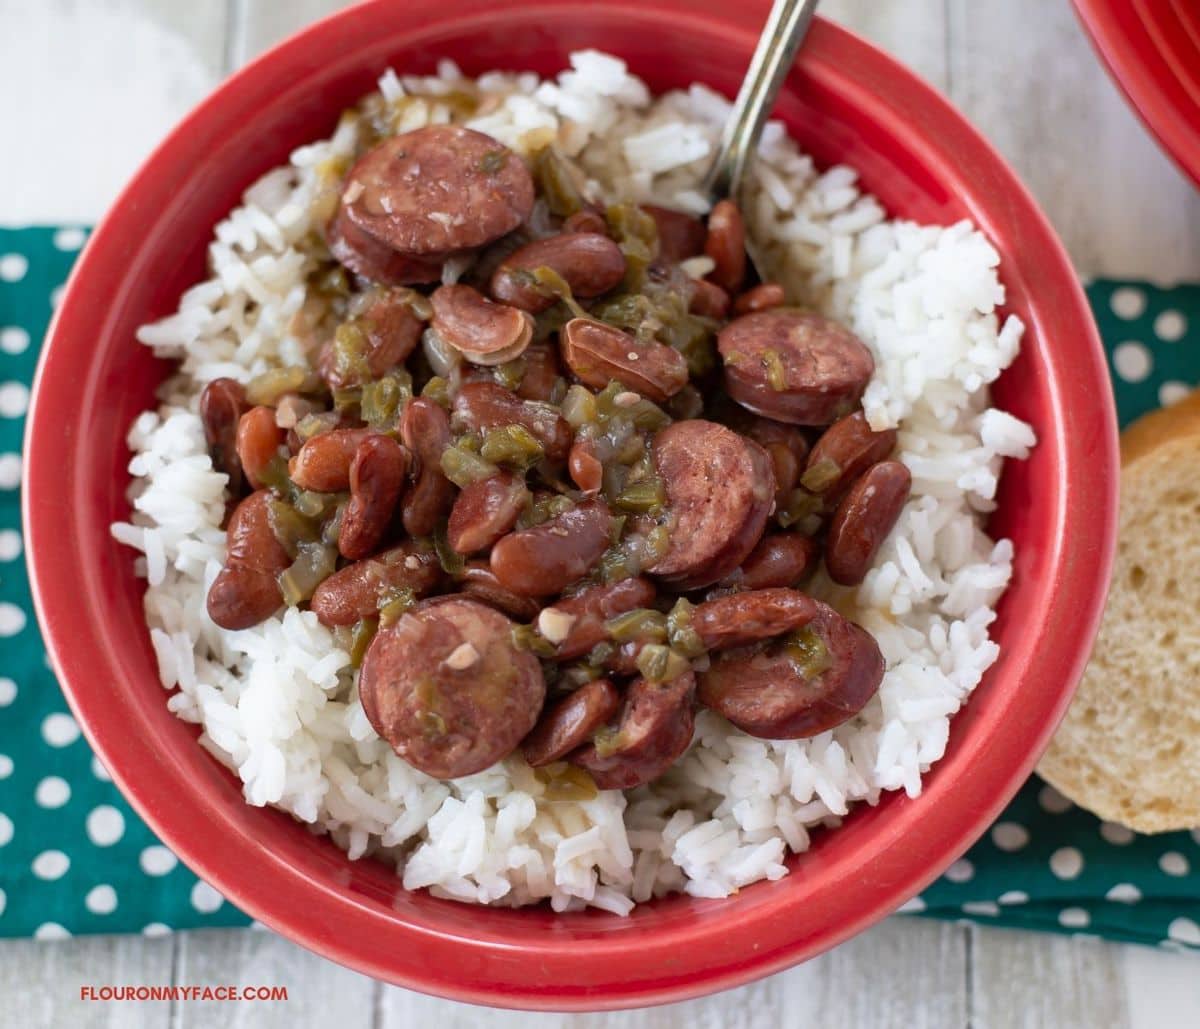 A red bowl filled with a serving or red beans and rice.